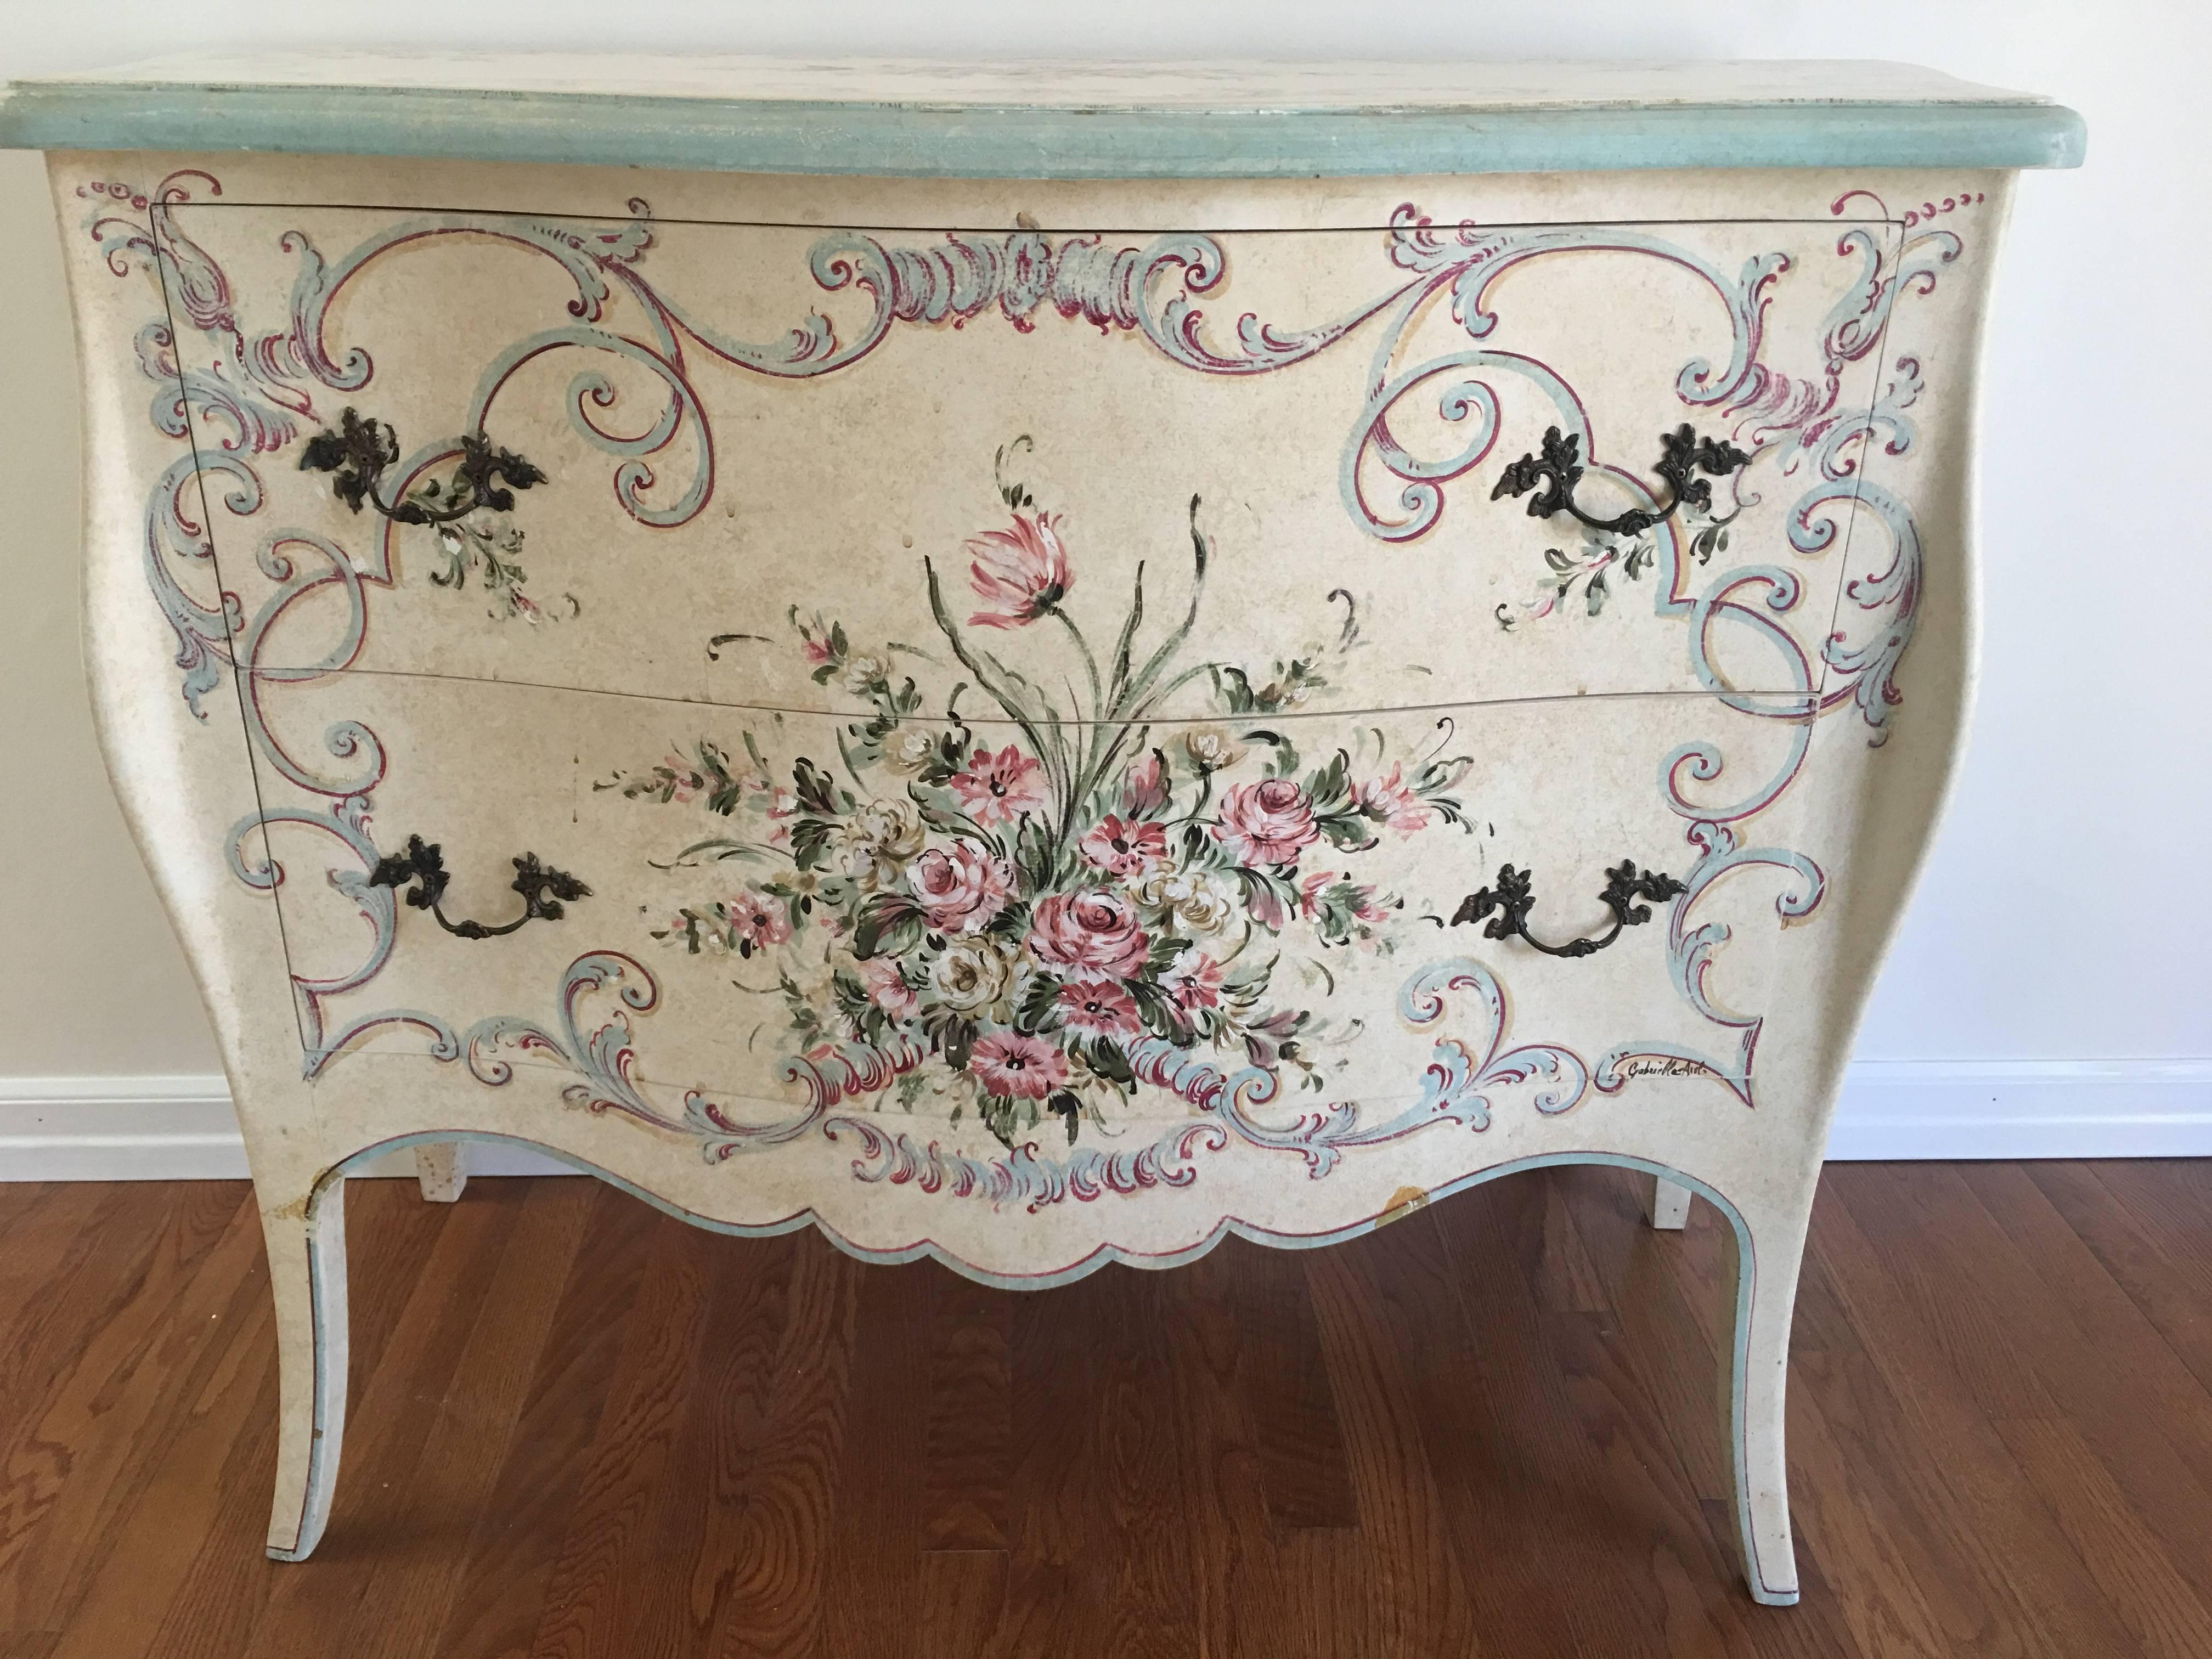 Two large very pretty hand-painted commodes in pastel colors with a creamy background in the style of Jane Keltner, no labels. Came from a high end furniture store in Princeton NJ (Waverly) about 20 years ago. Imported from Italy.
Will split the